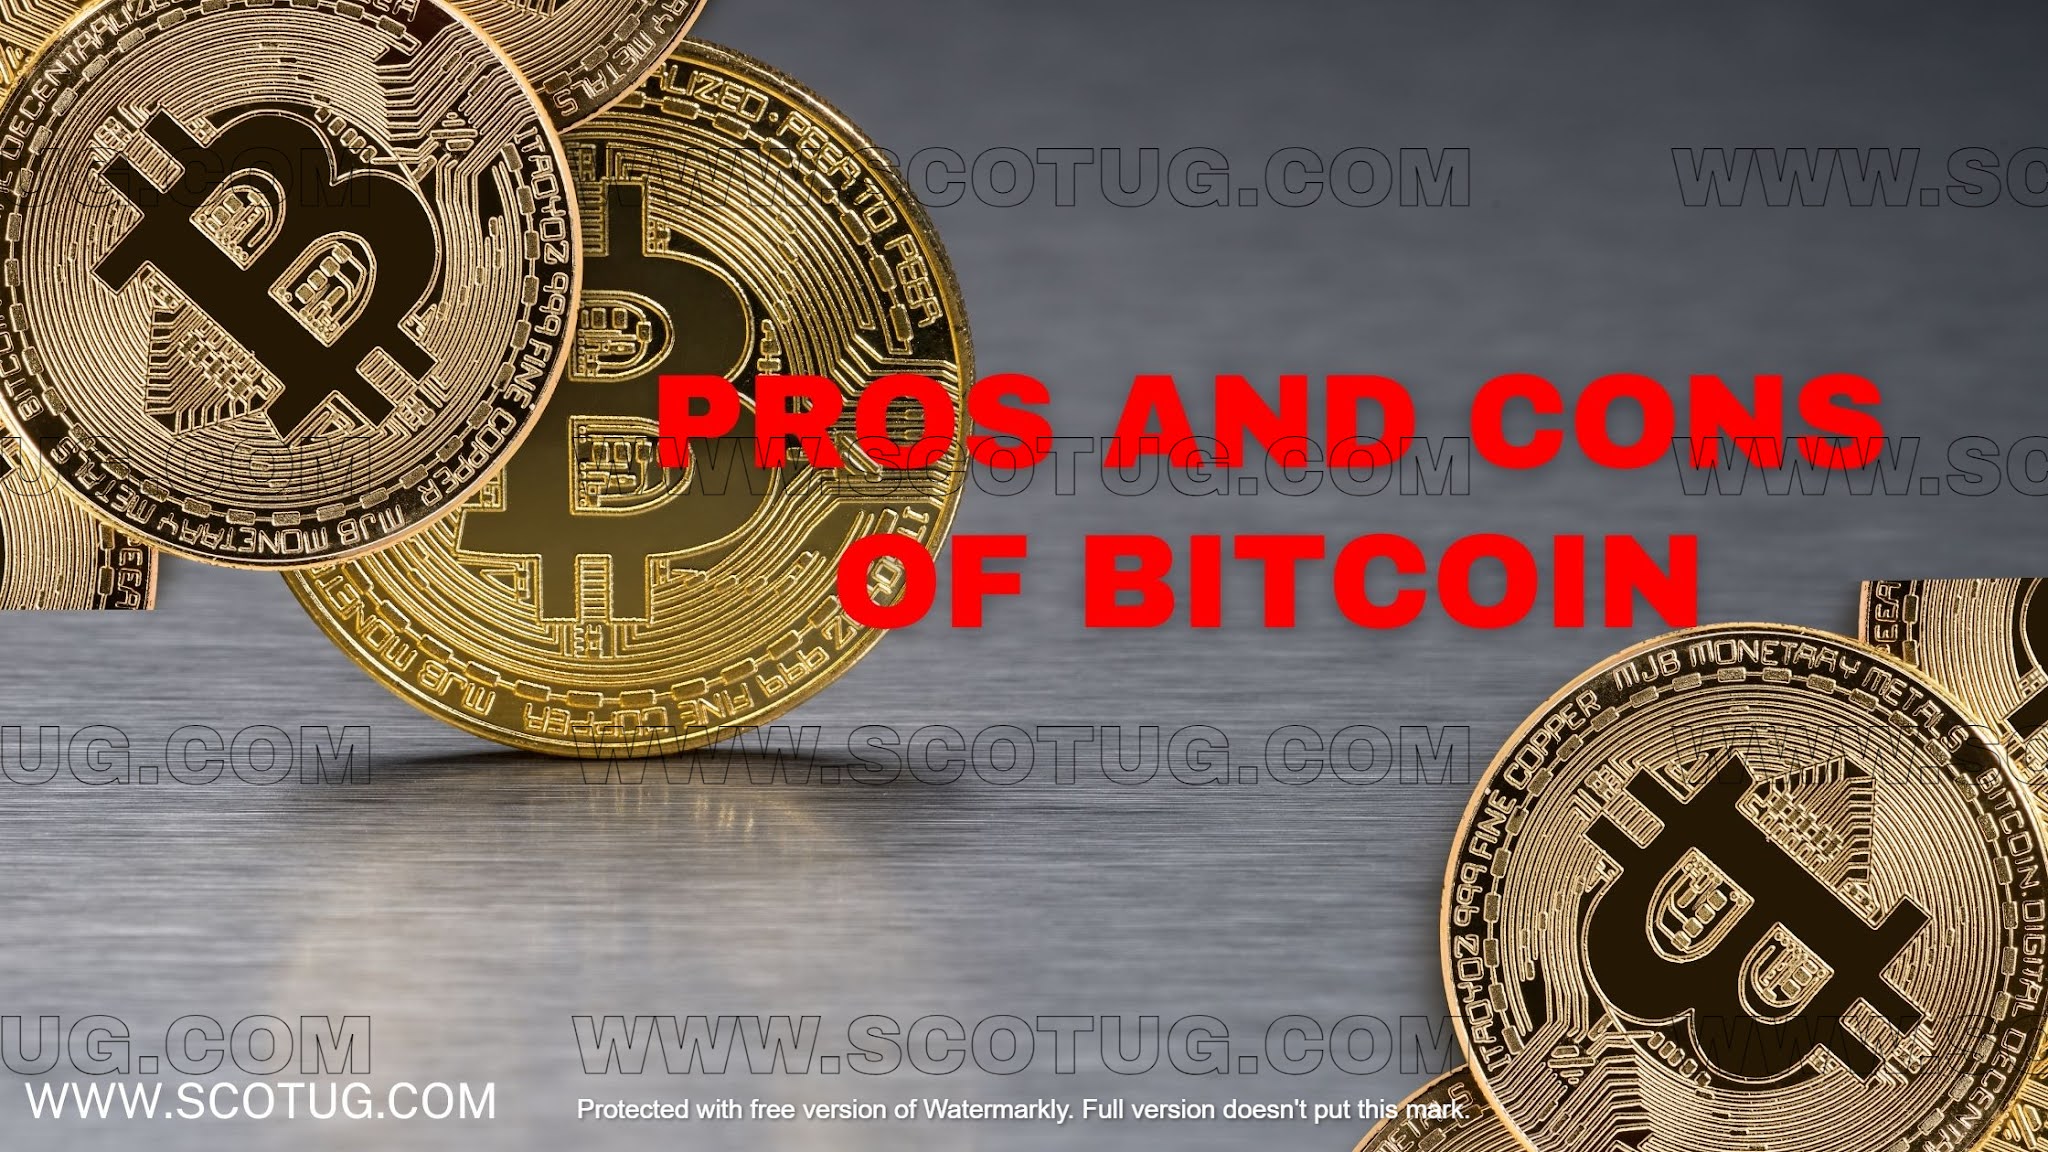 Pros and cons of investing in Bitcoin